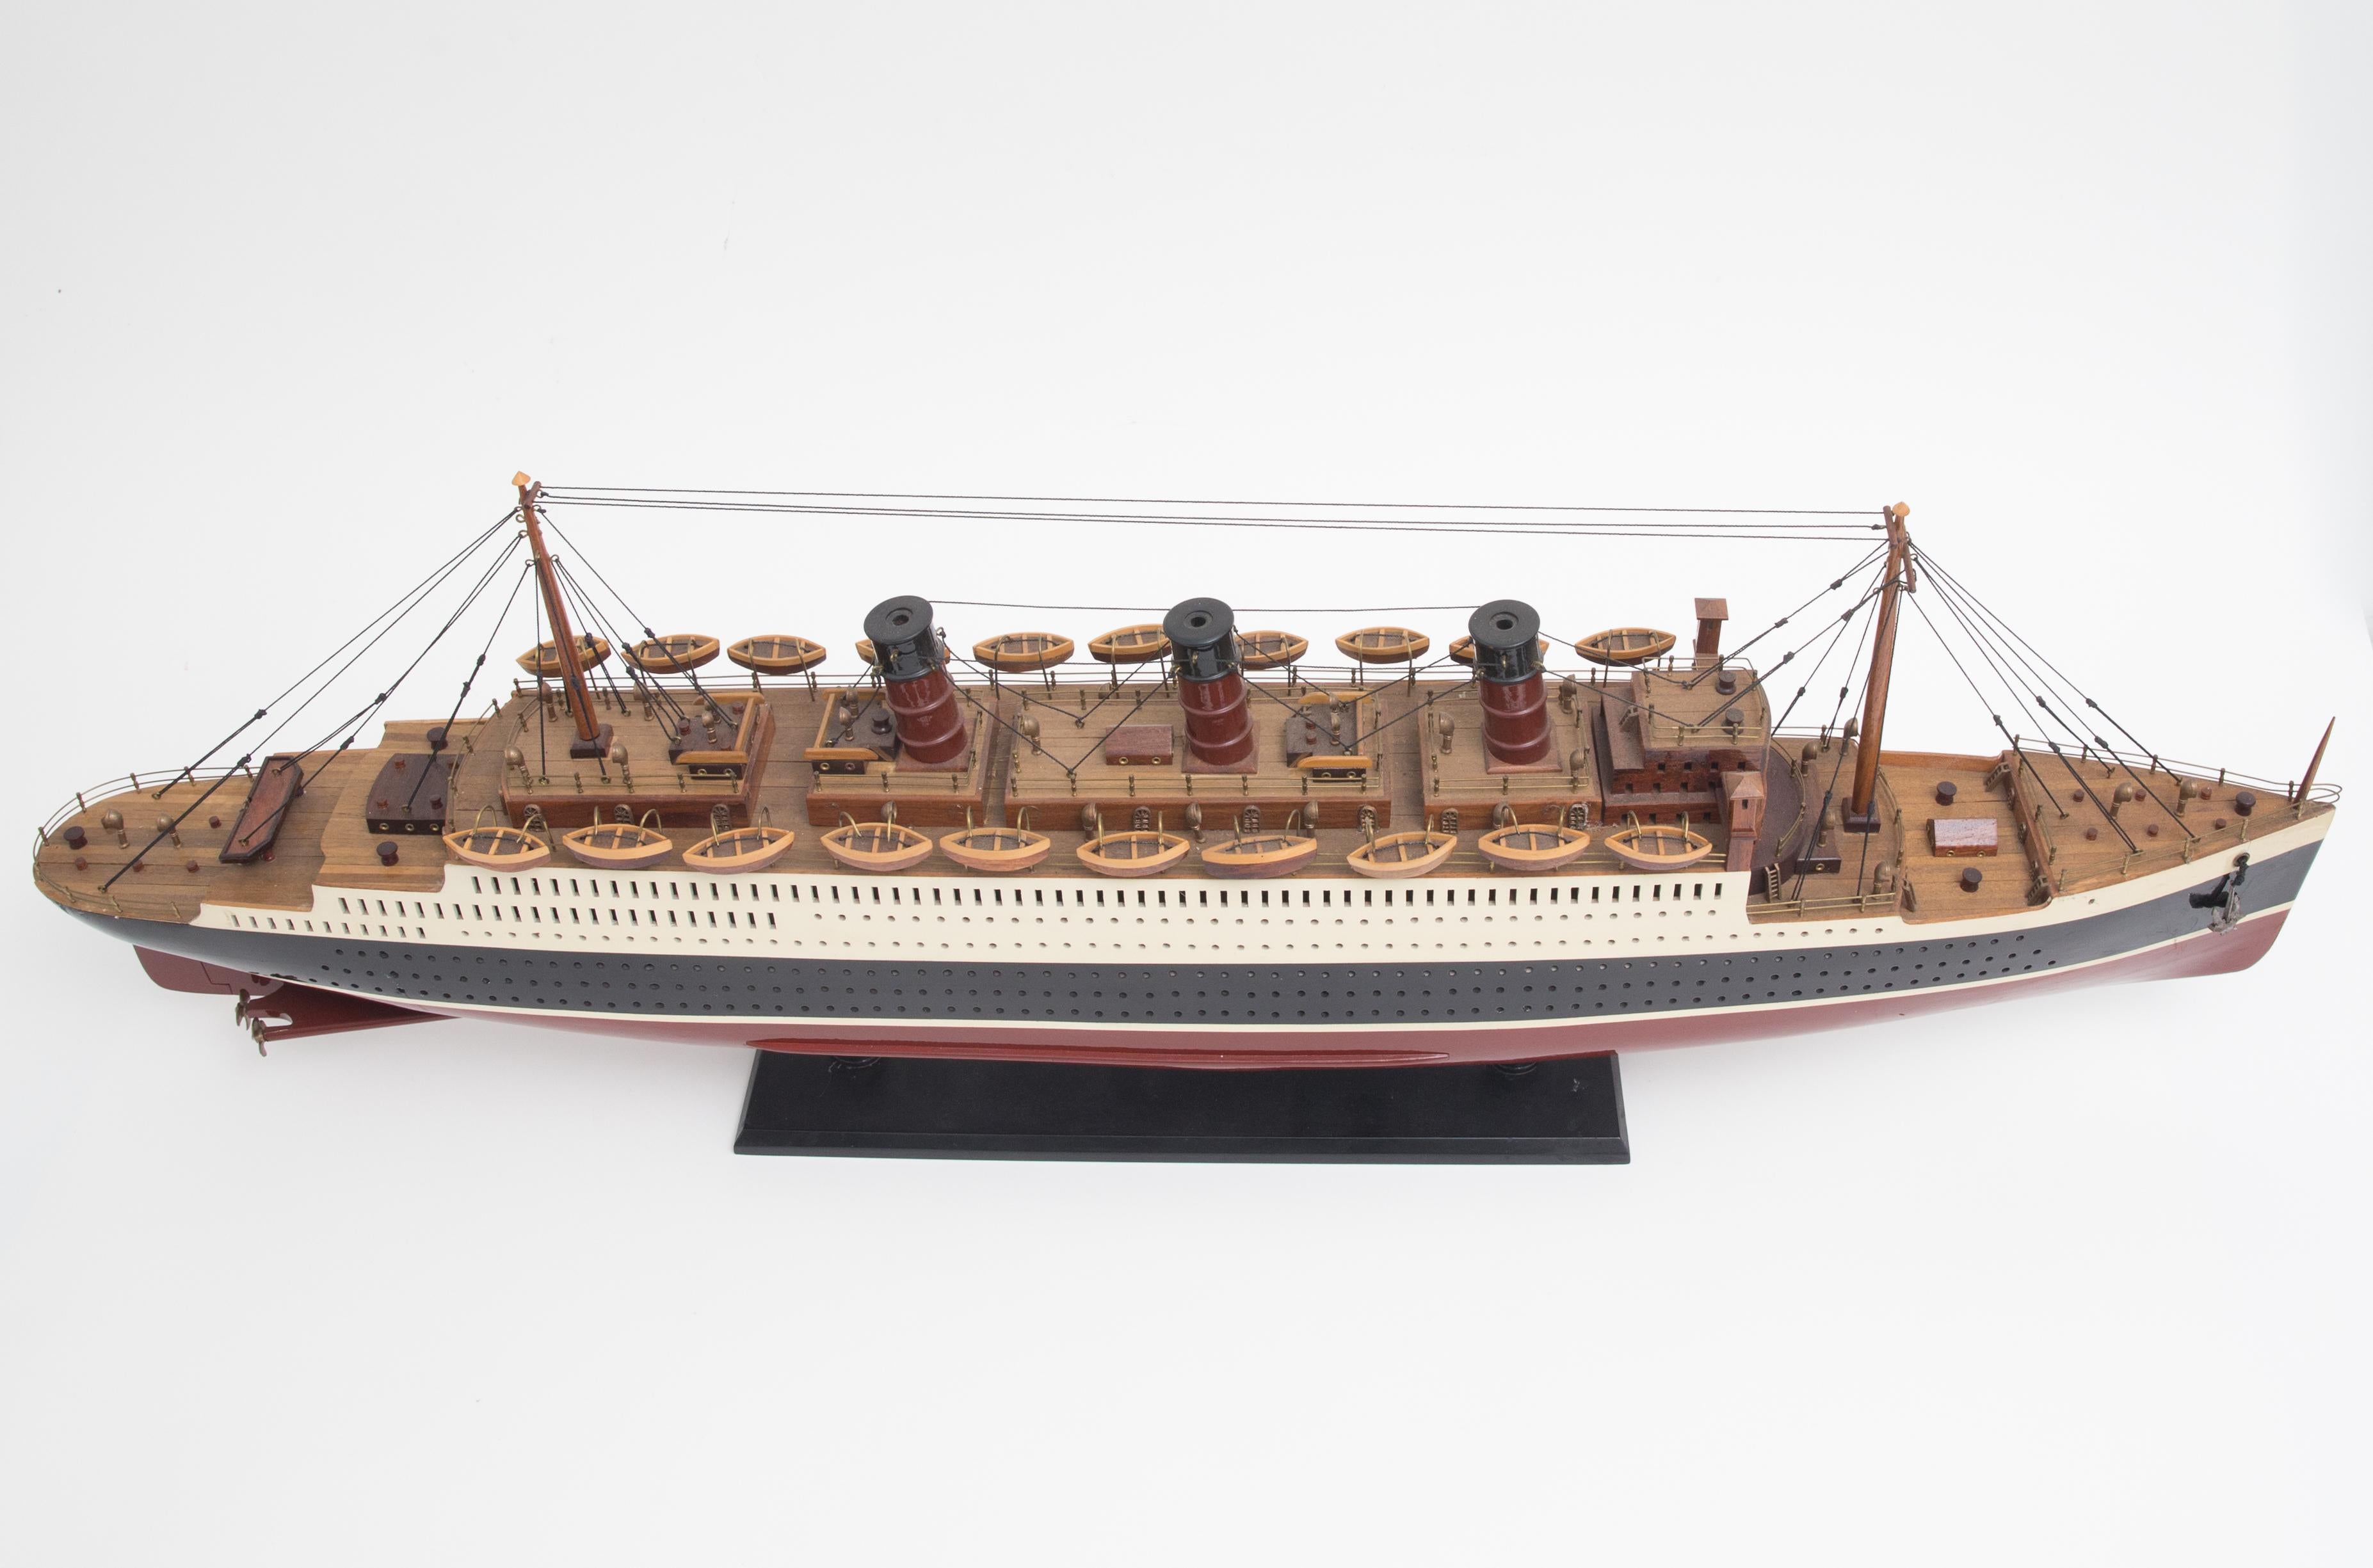 Model of the Cunard luxury Liner, Queen Mary 3